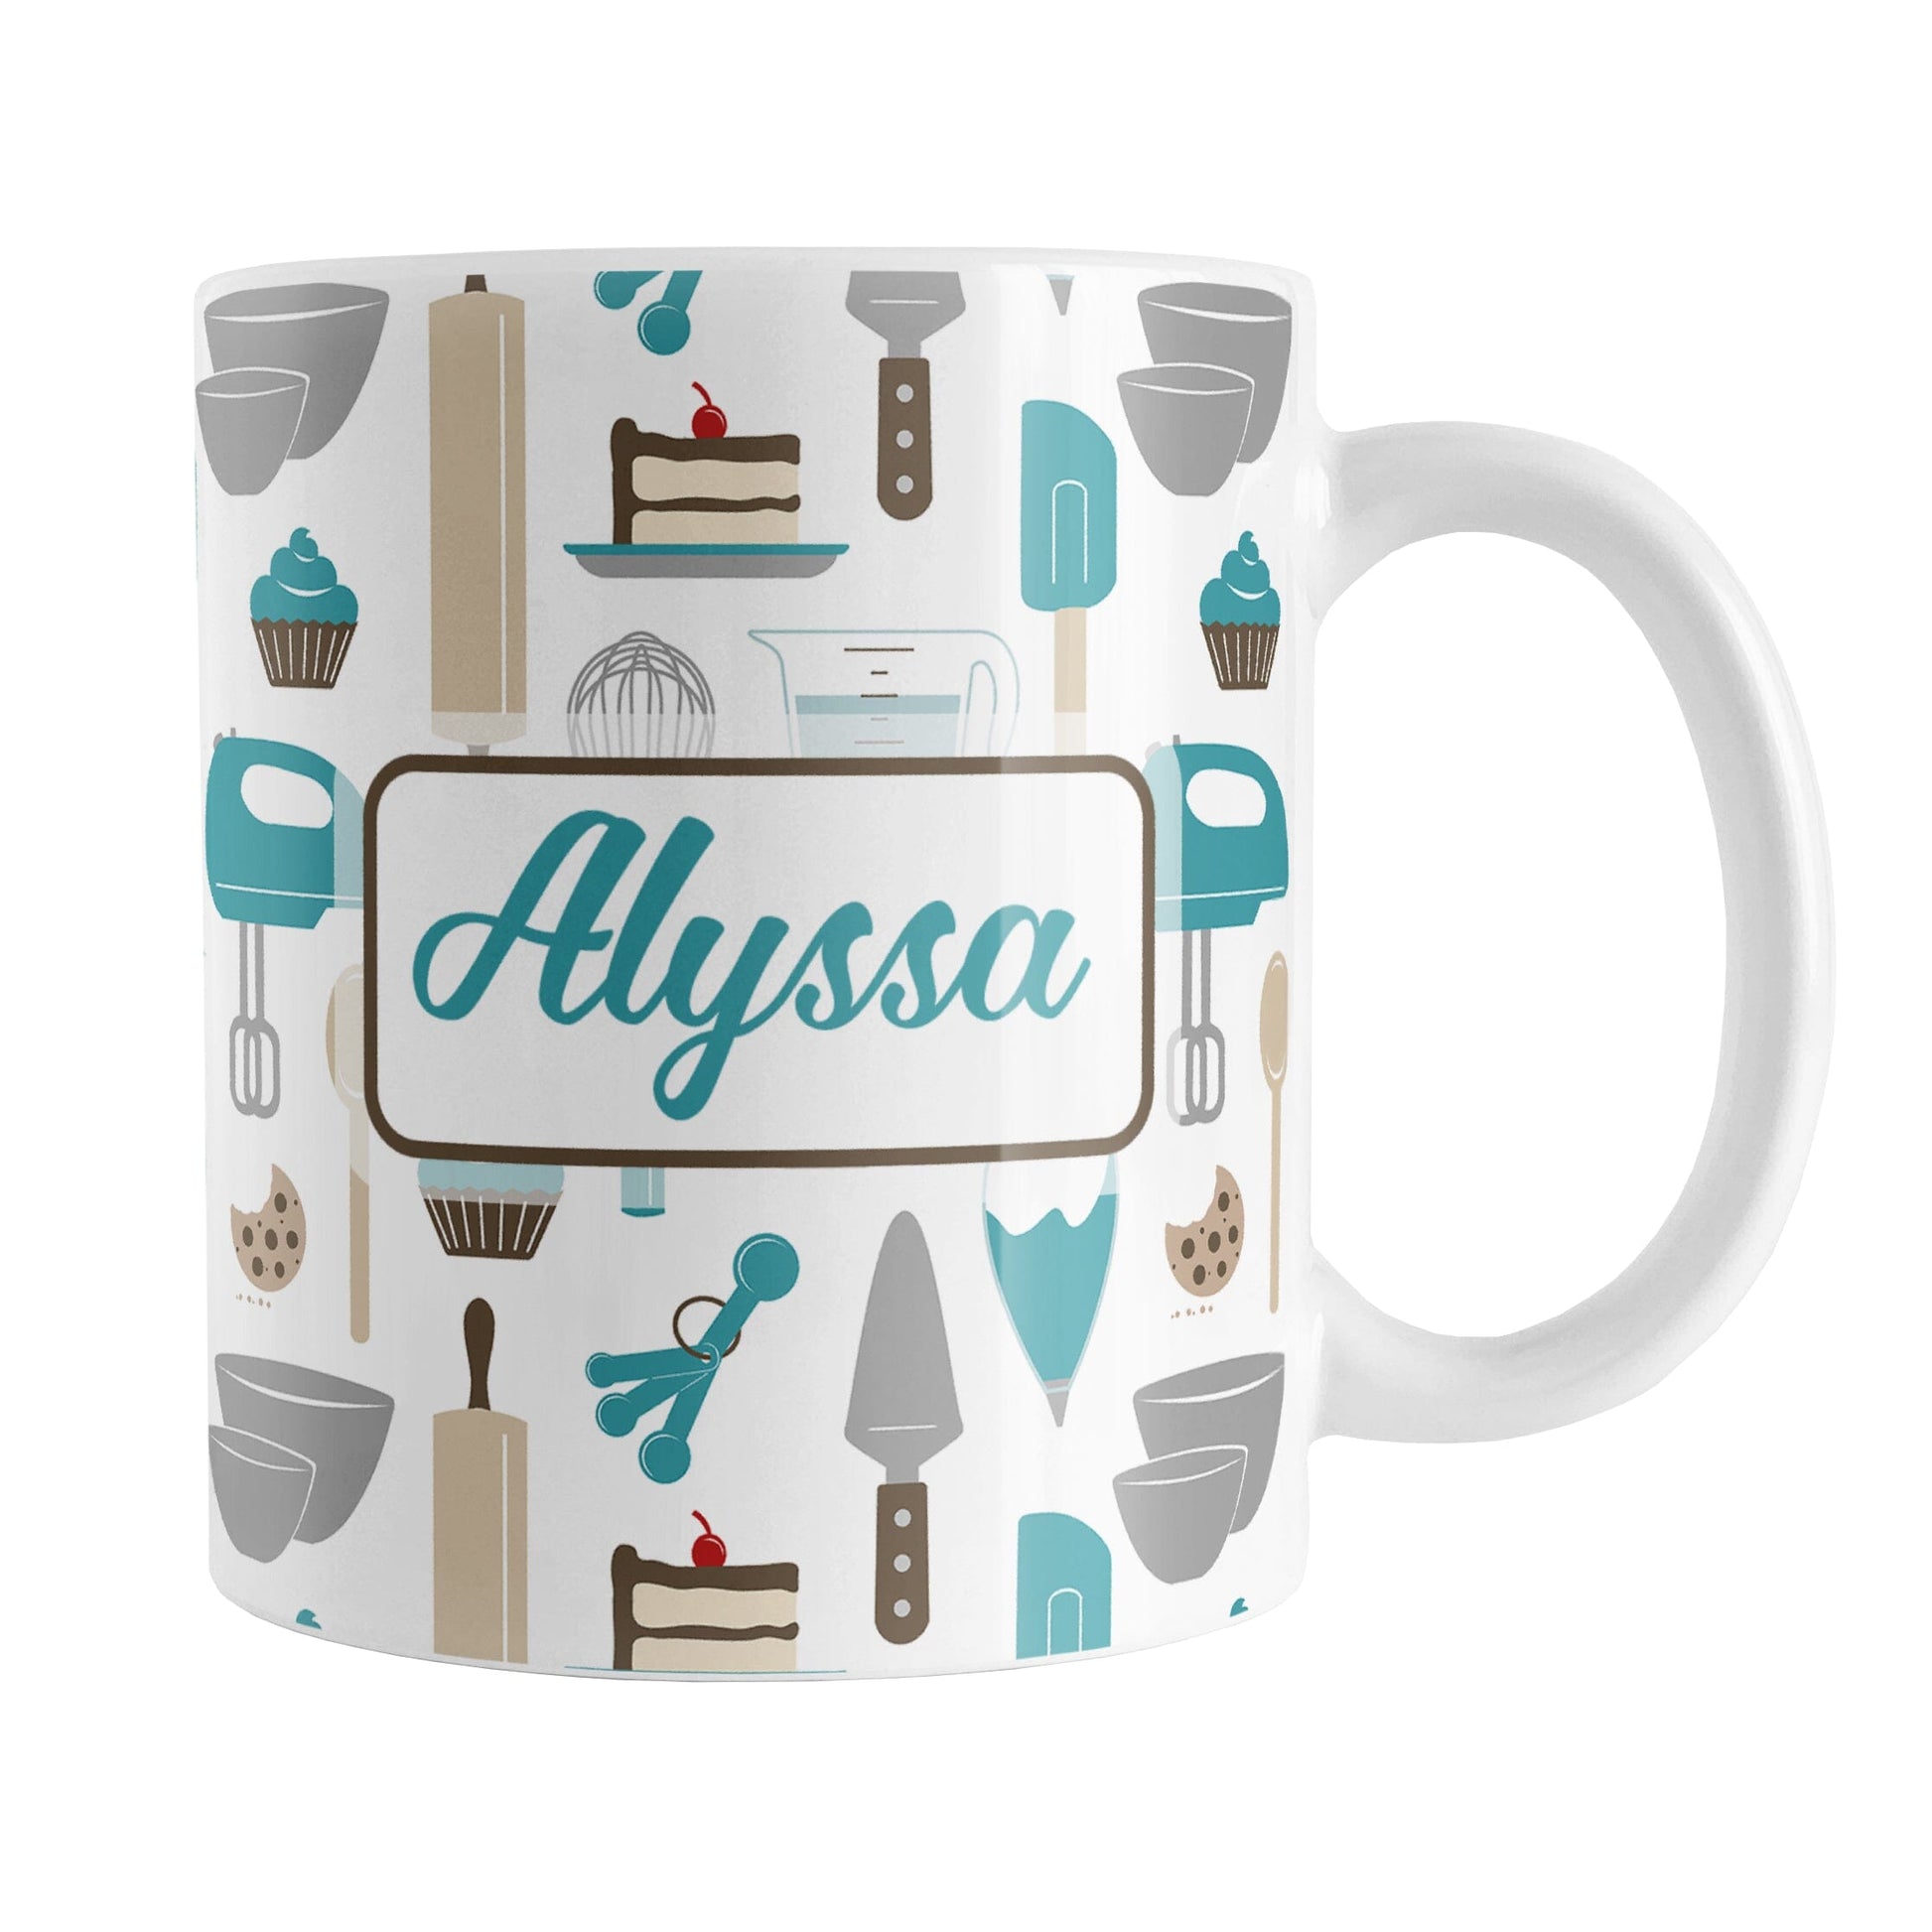 Personalized Turquoise Baking Pattern Mug (11oz) at Amy's Coffee Mugs. A ceramic coffee mug designed with a pattern of baking tools like spatulas, whisks, mixers, bowls, and spoons, with cookies, cupcakes, and cake all in a turquoise, gray, brown, and beige color scheme that wraps around the mug. Your name is printed in a turquoise script font on both sides of the mug over the baking pattern. 